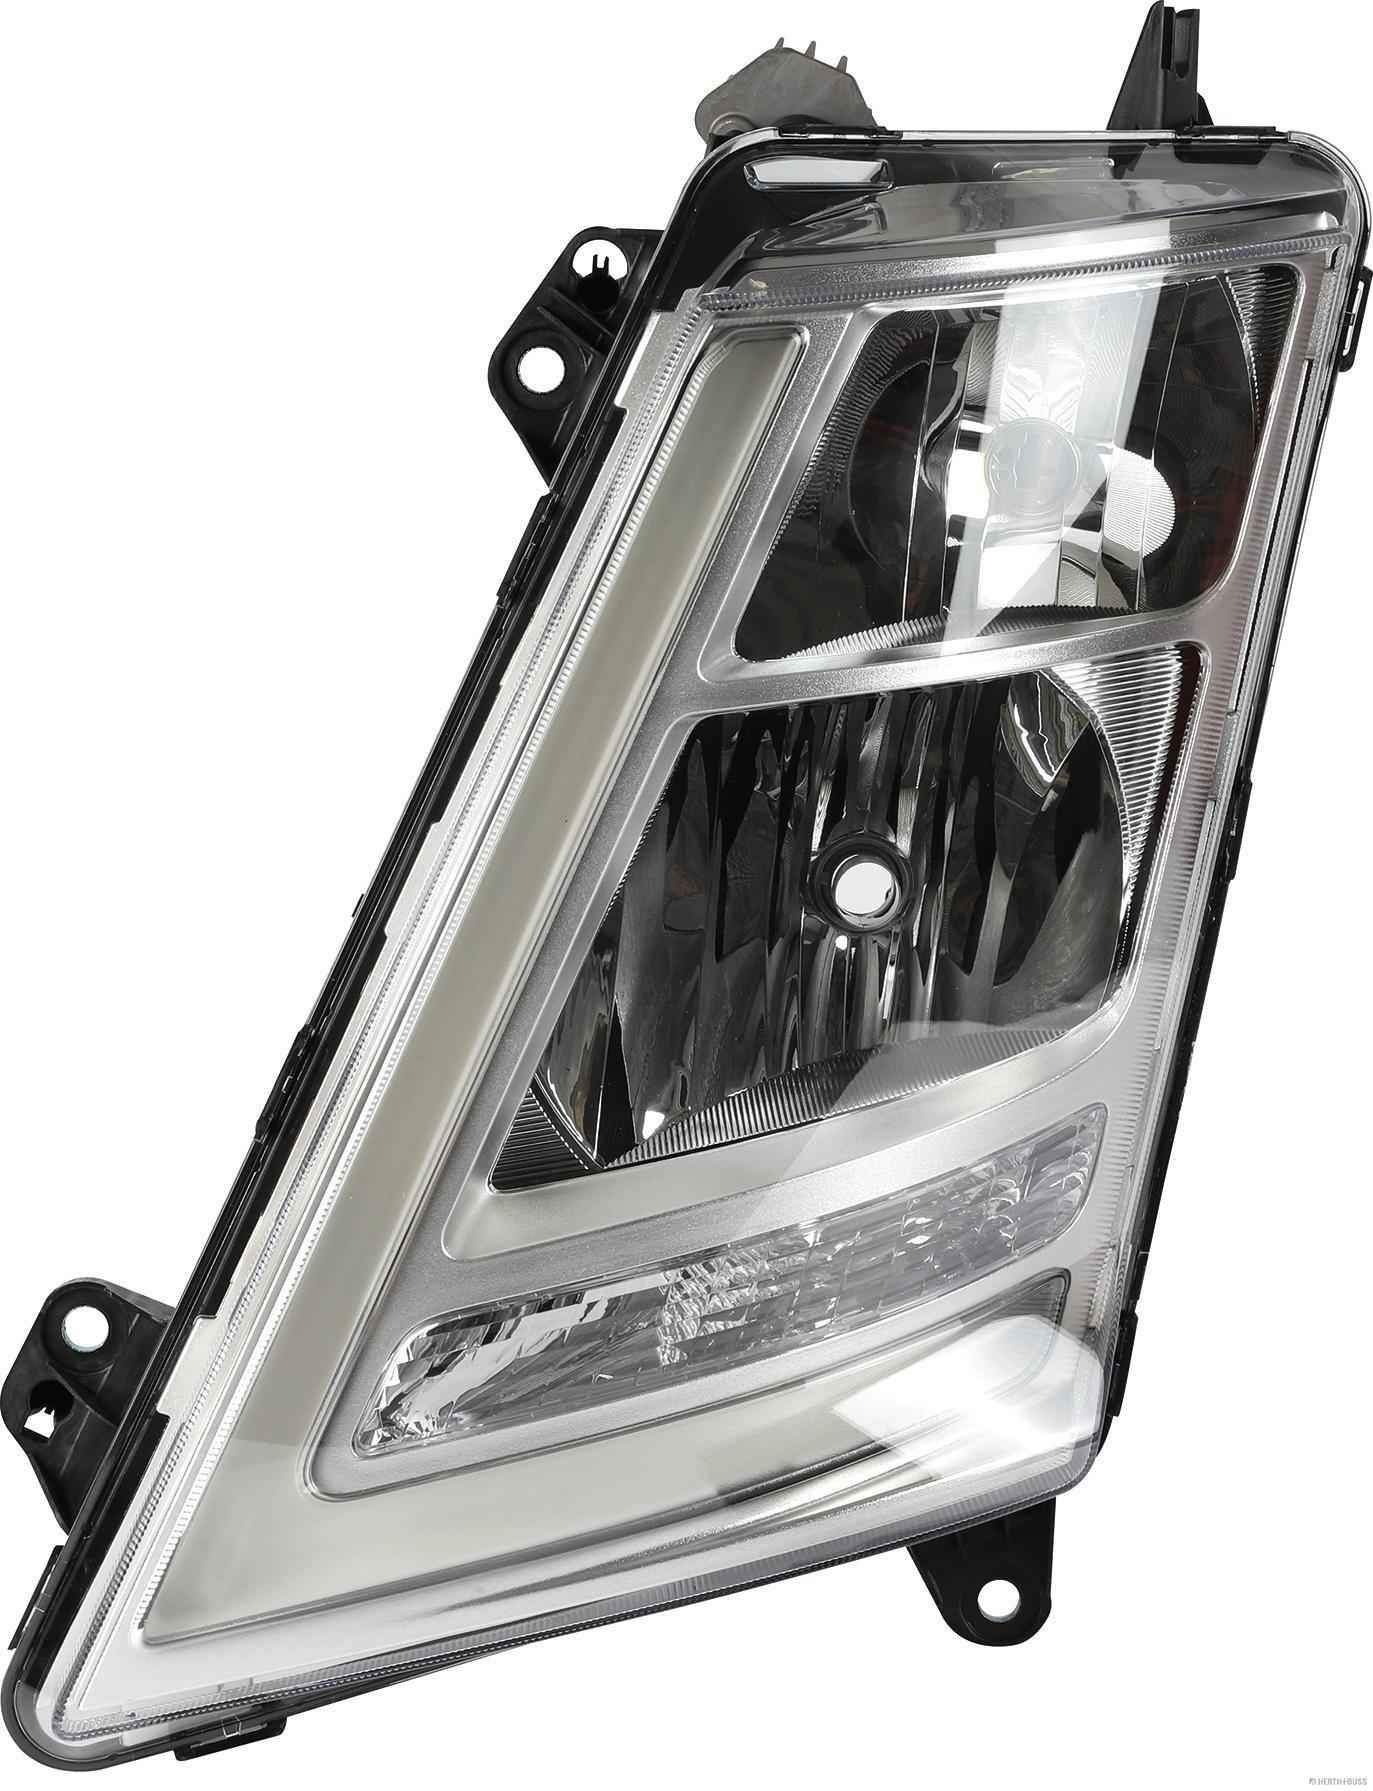 HERTH+BUSS ELPARTS 81658241 Headlight Left, H1/H7, PY21W, LED, chrome, with daytime running light (LED), with motor for headlamp levelling